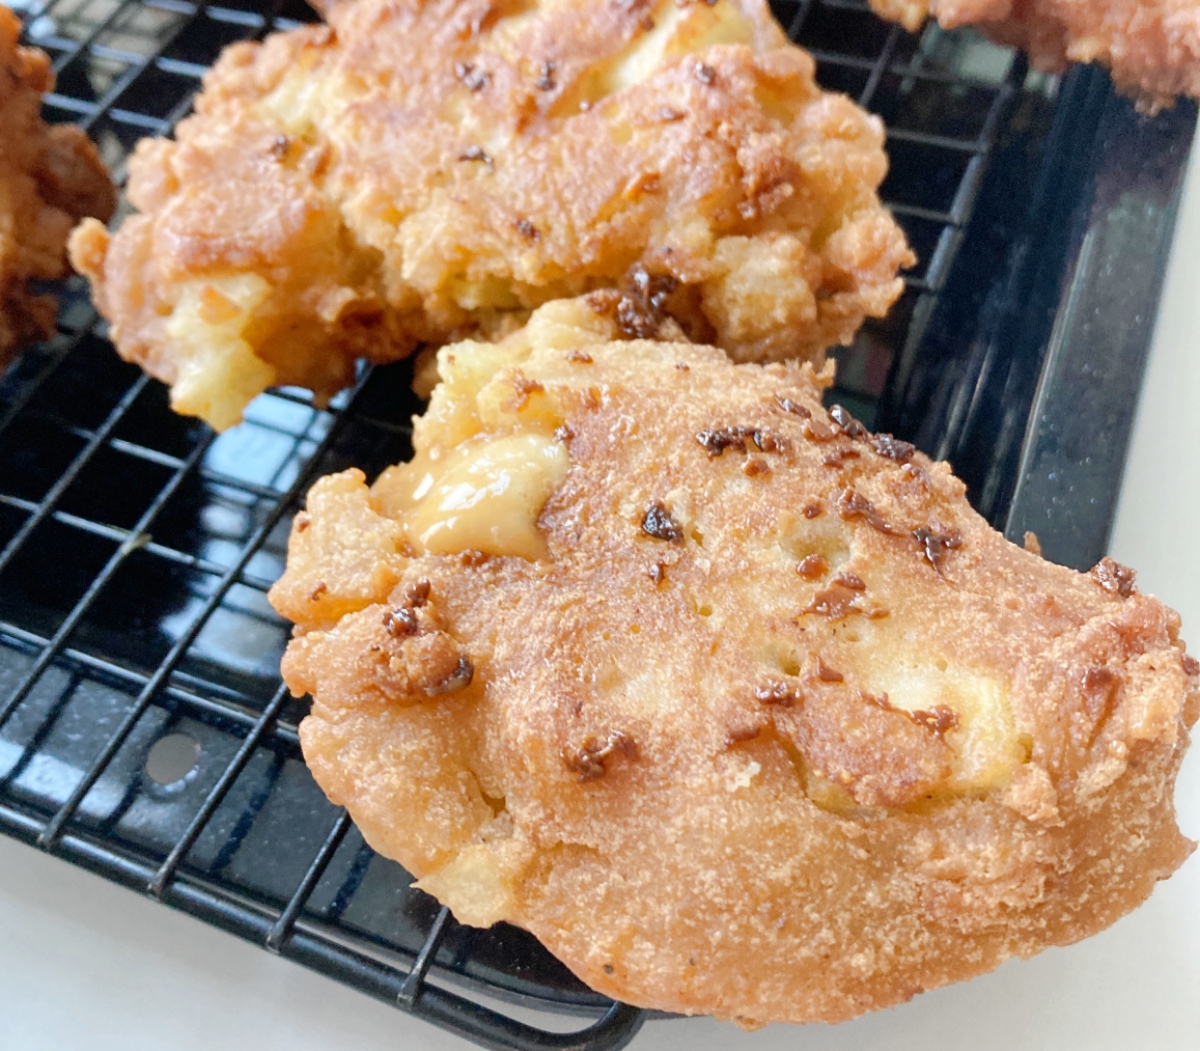 Heat oil to 270˚F in a deep pan. Use 2 spoons to make balls of dough and place them in oil, keeping only 4-6 or so small fritters in the pan at one time to avoid cooling the oil. Fry for 3 minutes on each side or until golden brown. Remove from oil to wire rack to cool.